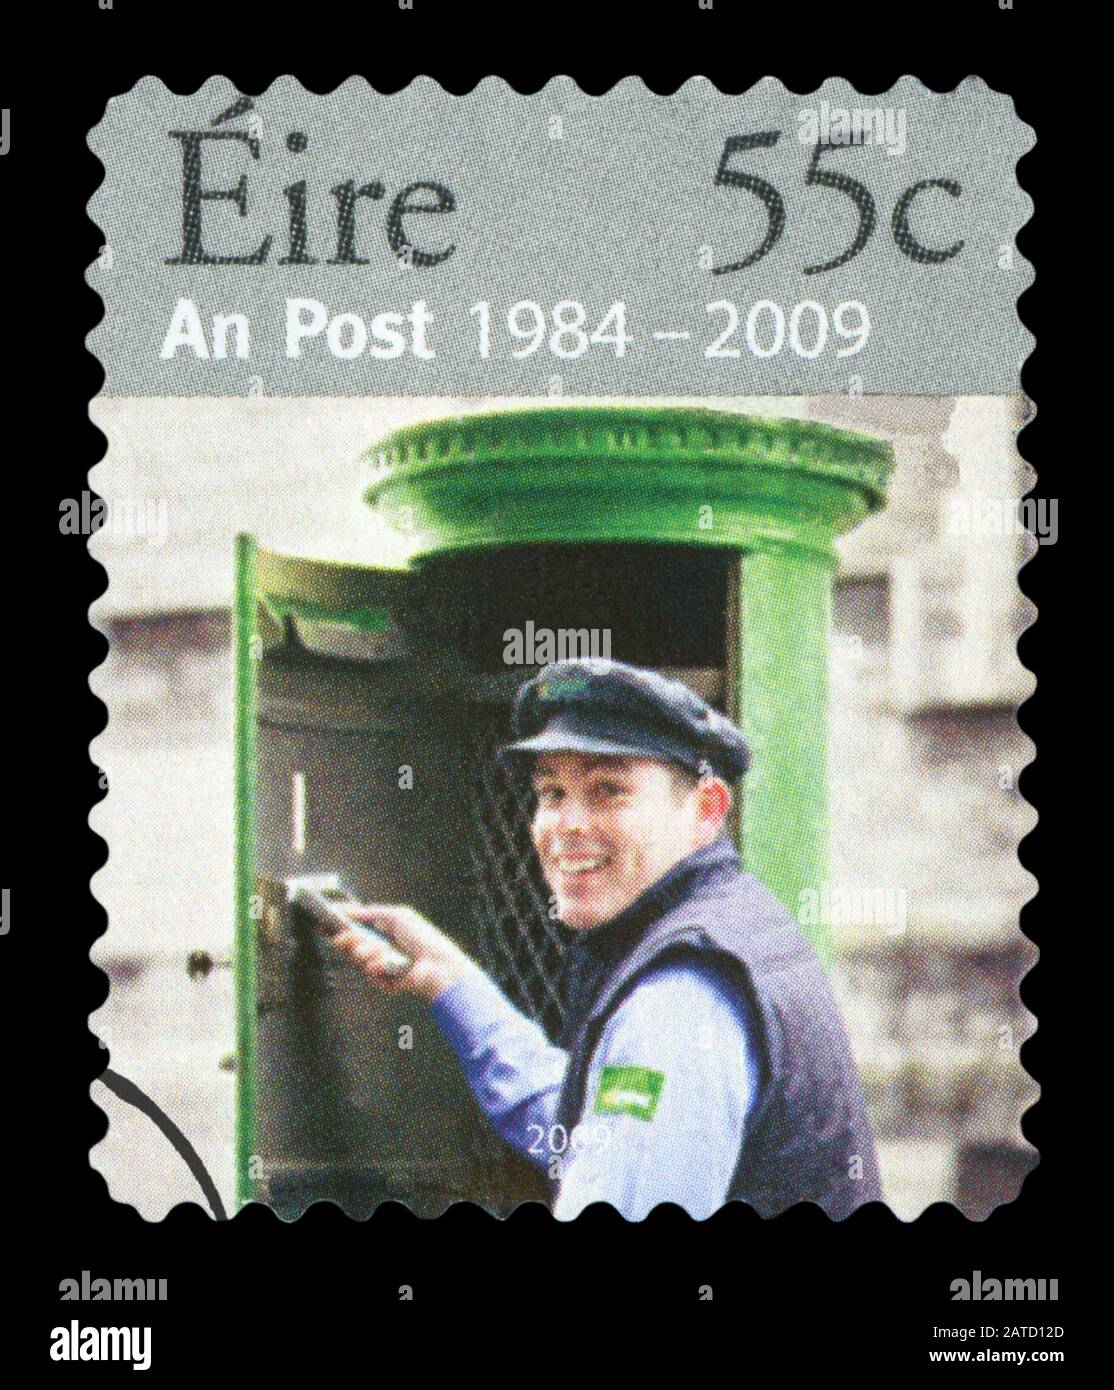 IRELAND - CIRCA 2009 : an Ireland postal stamp cancelled depicting An Post Eire from 1984 to 2009, circa 2009. Stock Photo